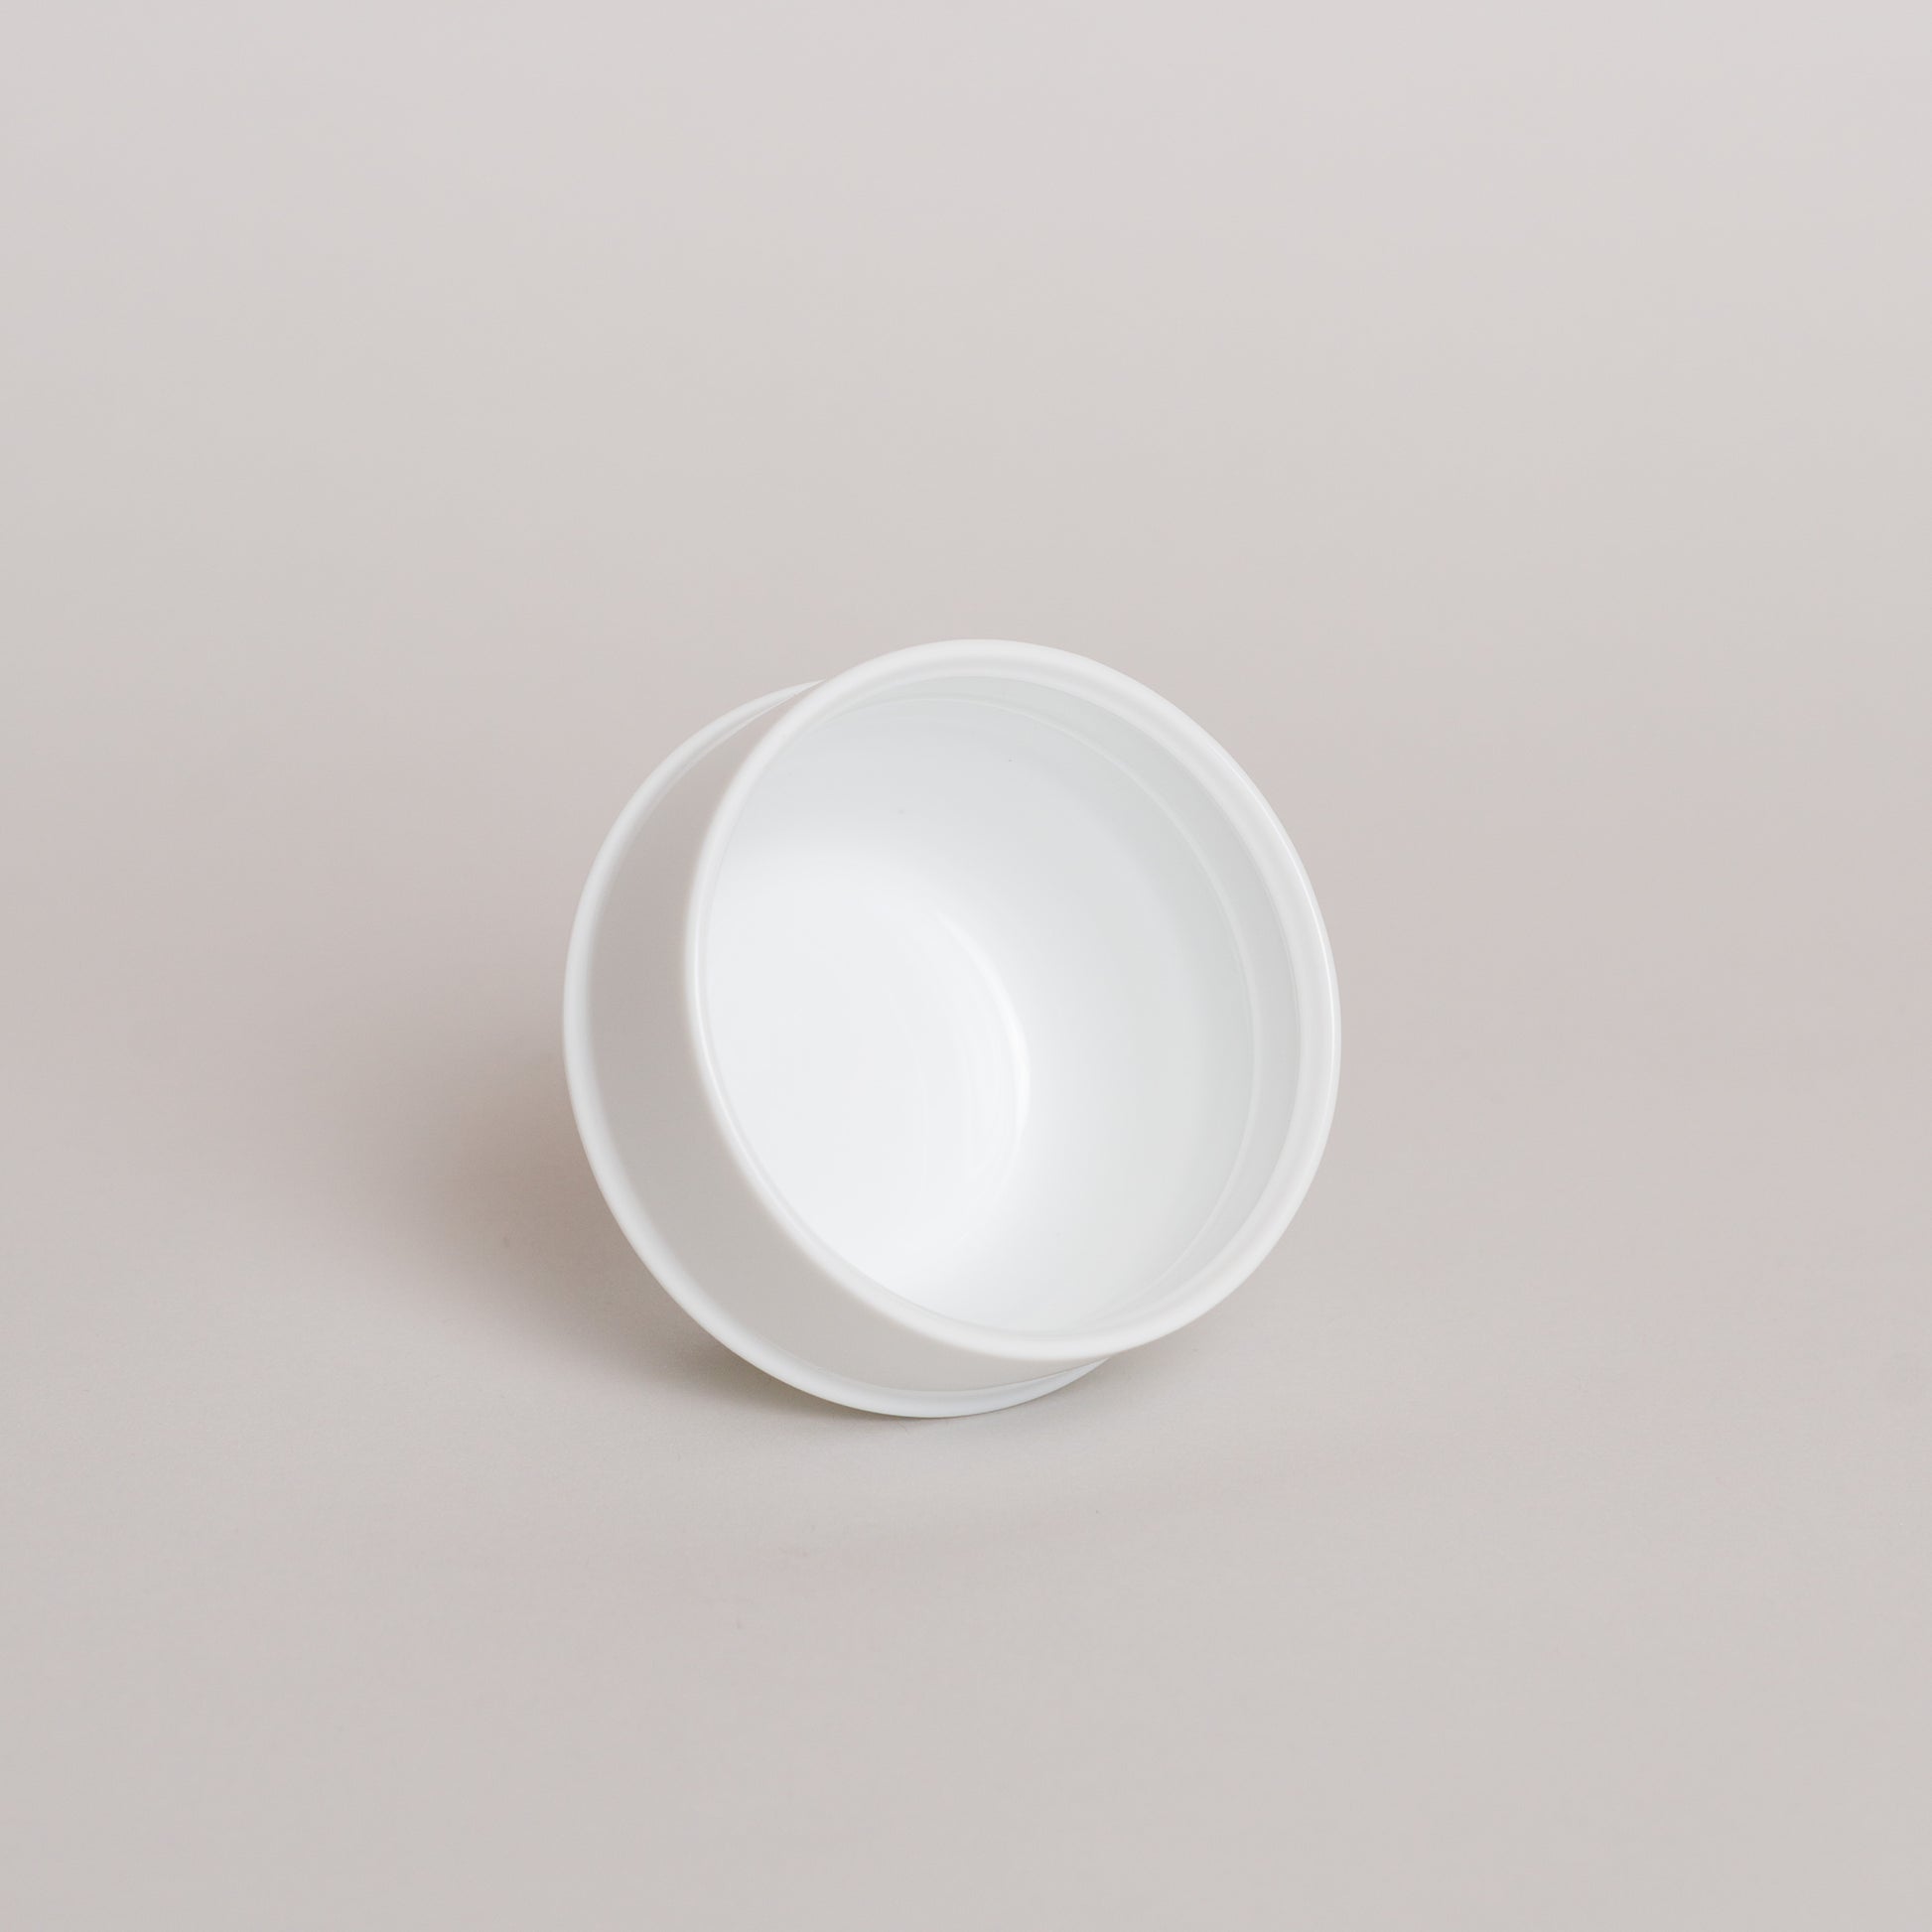 Origami Cupping Bowl in white